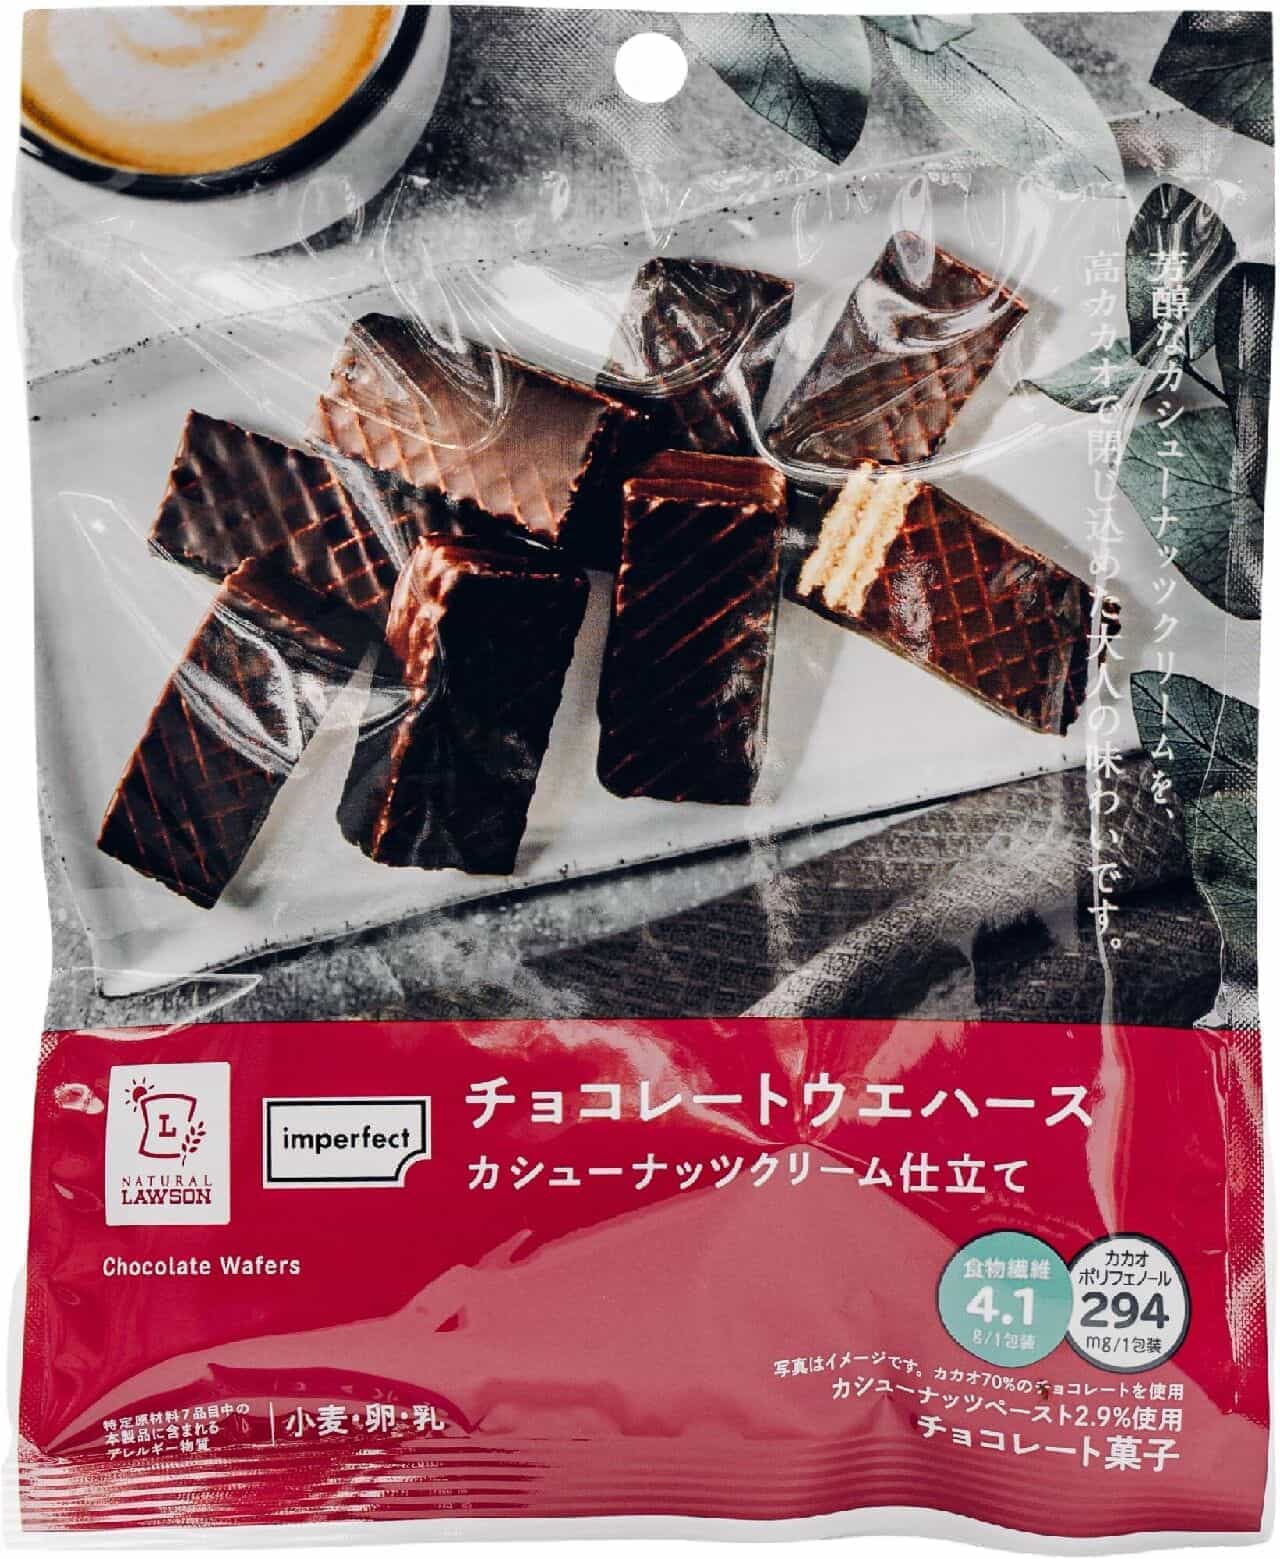 LAWSON・NATURAL LAWSON "Chocolate Wafer with Cashew Nut Cream